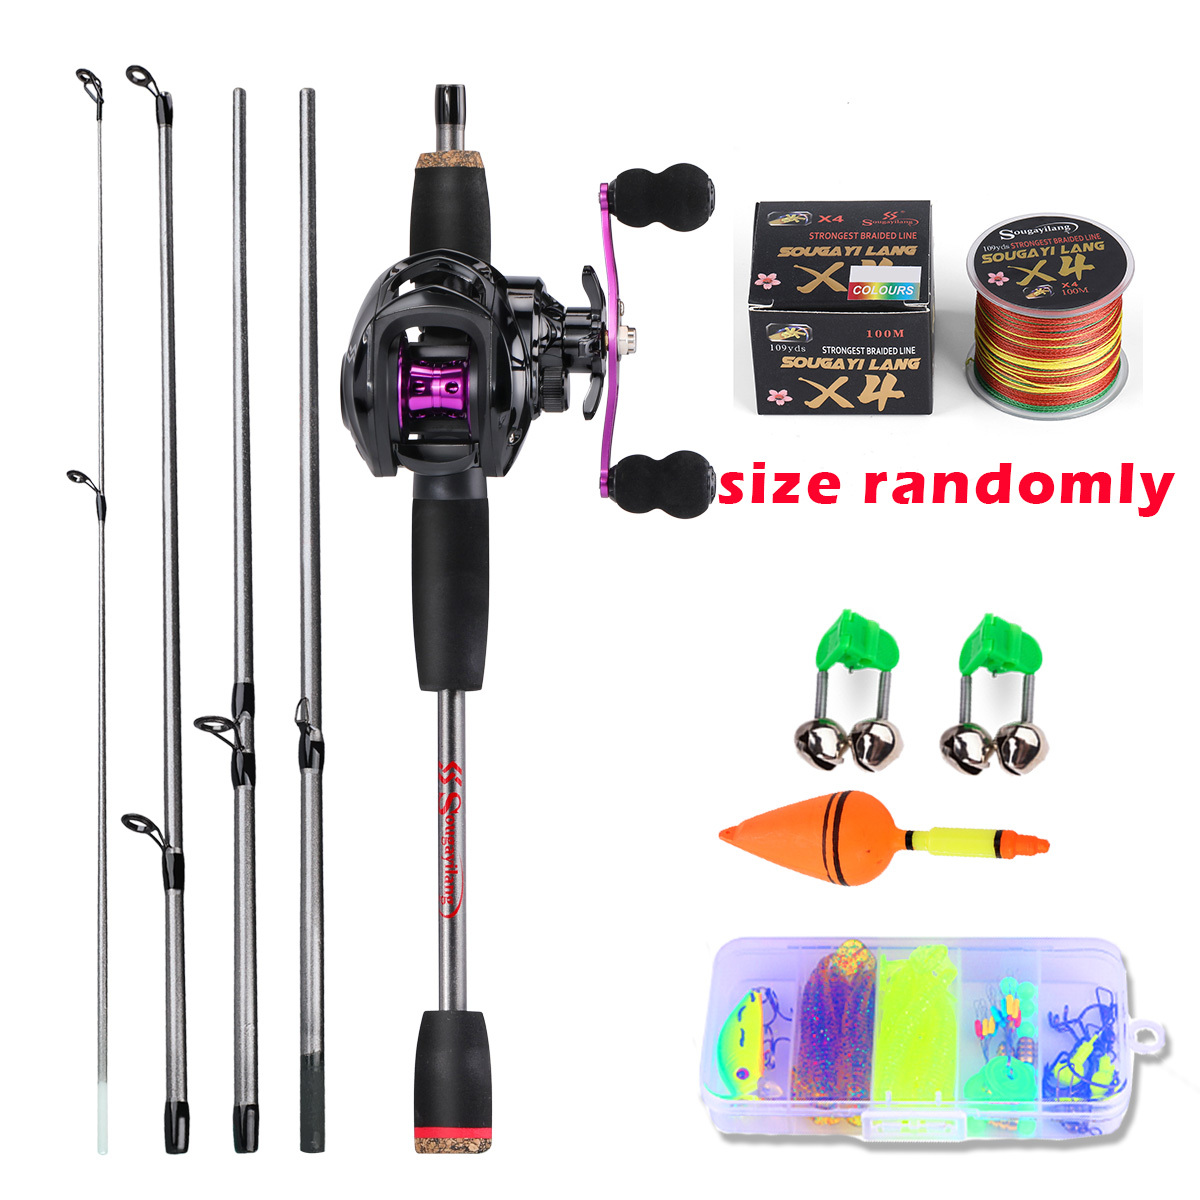 Sougayilang 1.7m/5.5ft Fishing Rod And Reel Set, Including 5 Sections  Casting Fishing Rod, 7.2:1 Gear Ratio Baitcasting Fishing Reel, 100m/328ft  PE